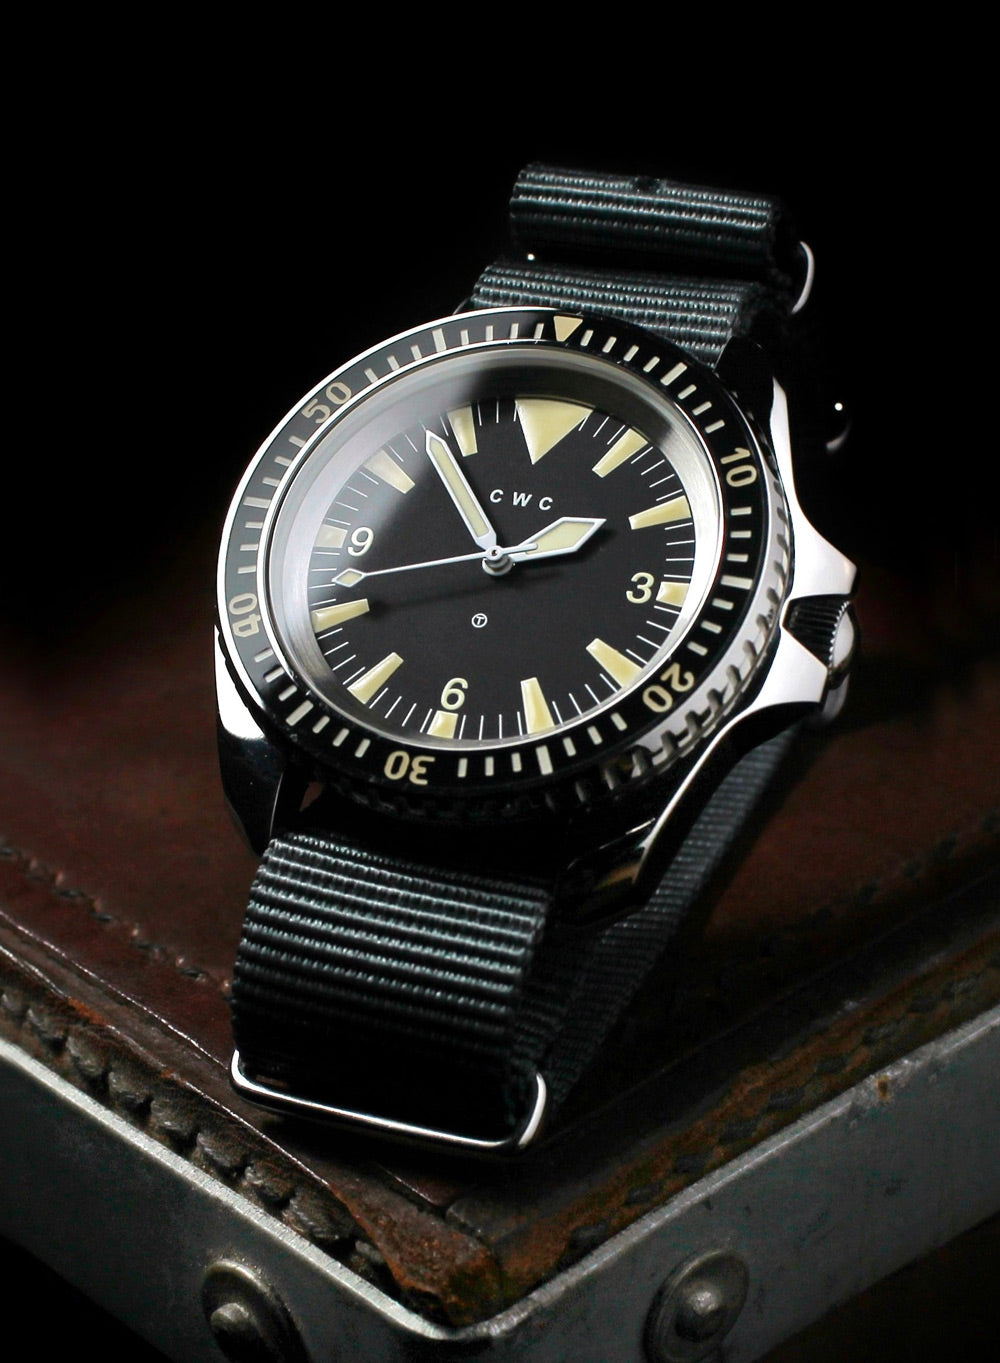 Royal Navy 1980 Reissue watches now available